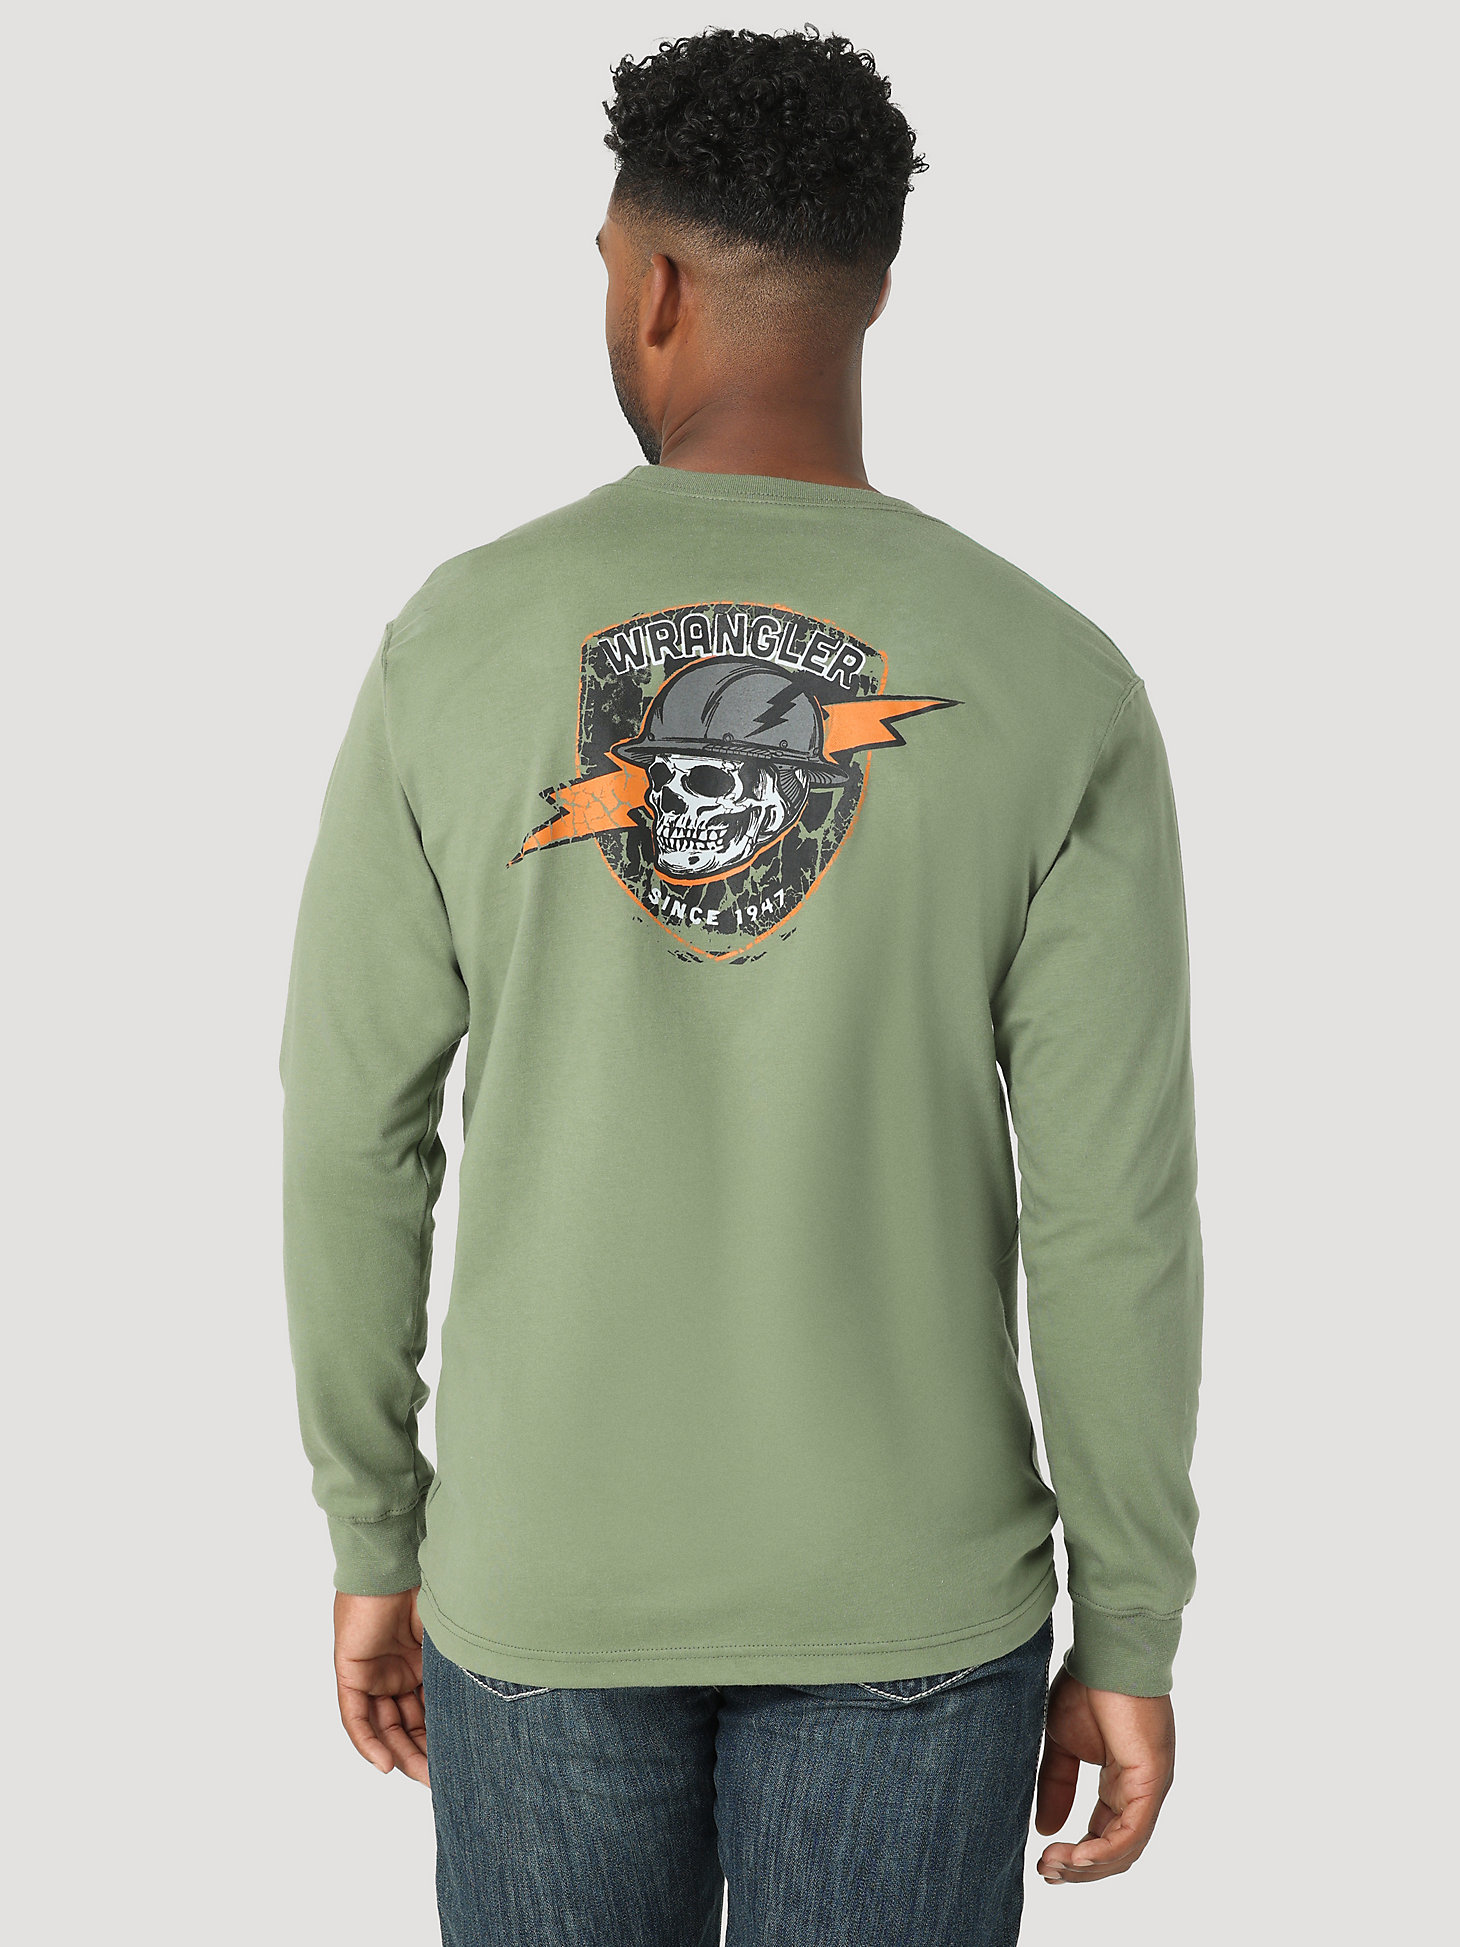 FR Flame Resistant LS Skull Logo Graphic T-Shirt in Military Green alternative view 1